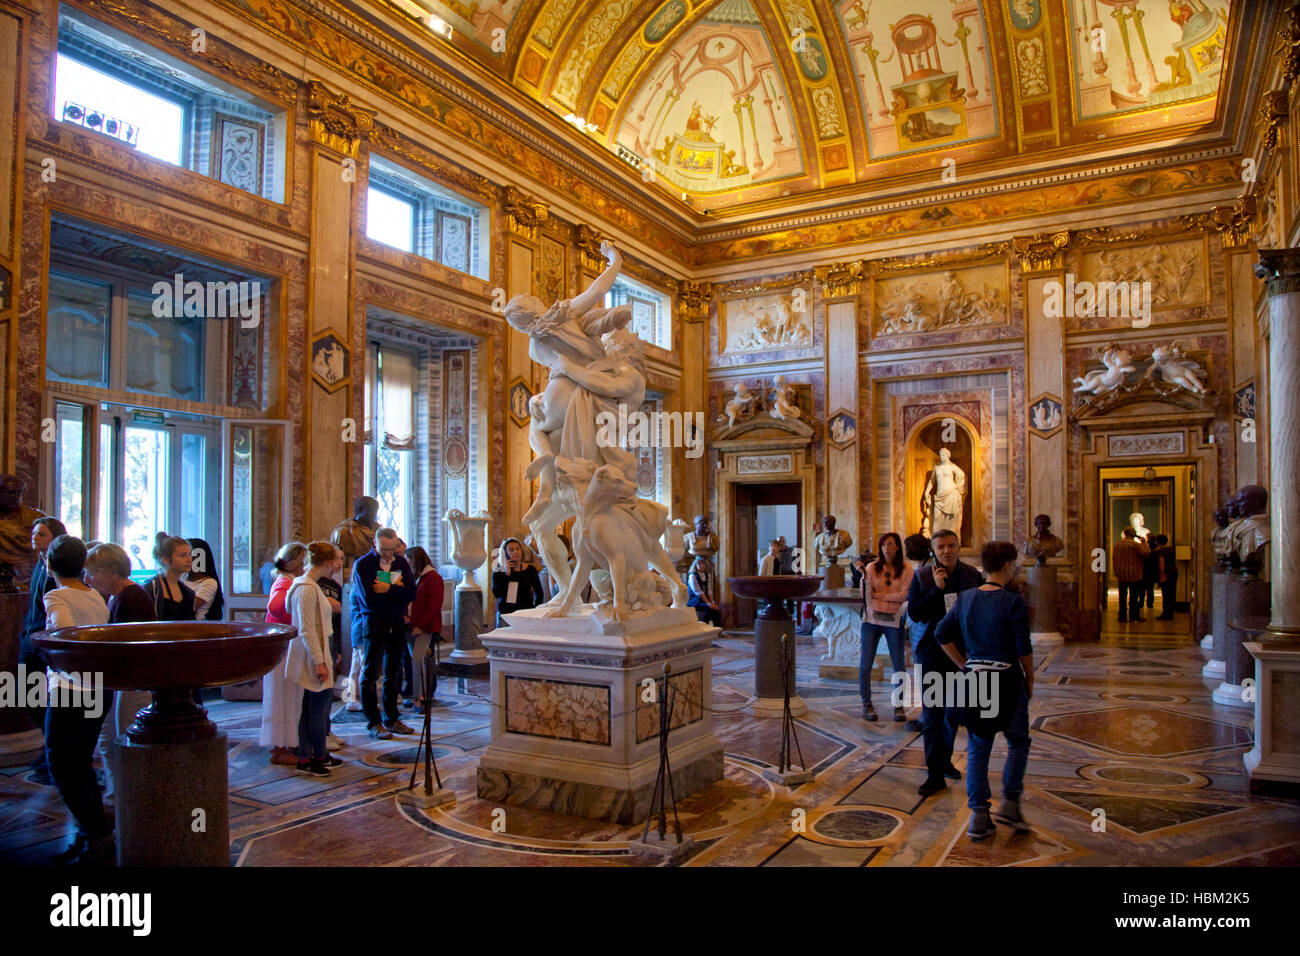 Rome, Villa Borghese, museum and gallery, Bernini sculpture in gallery with tourists Stock Photo